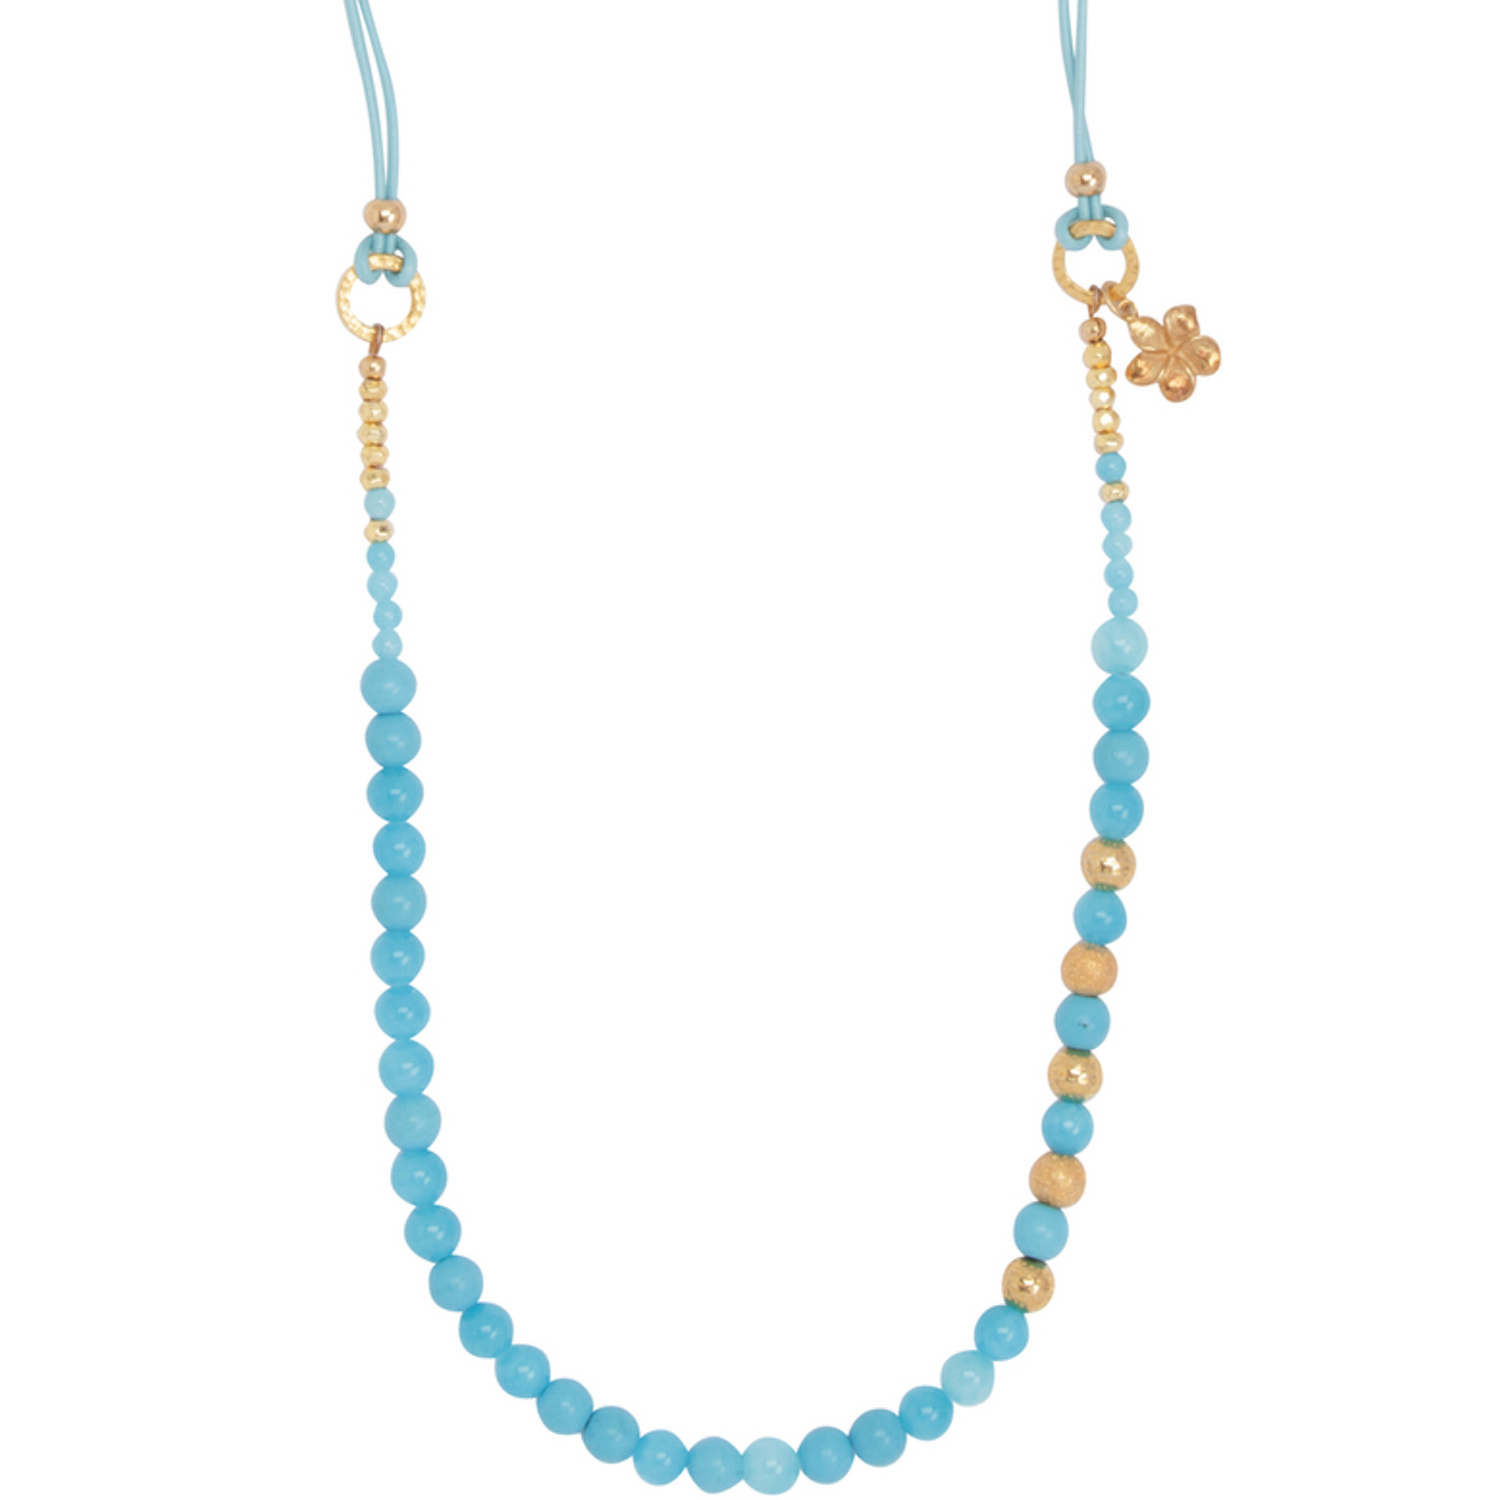 Coco Cabana Turquoise Leather Resort Necklace